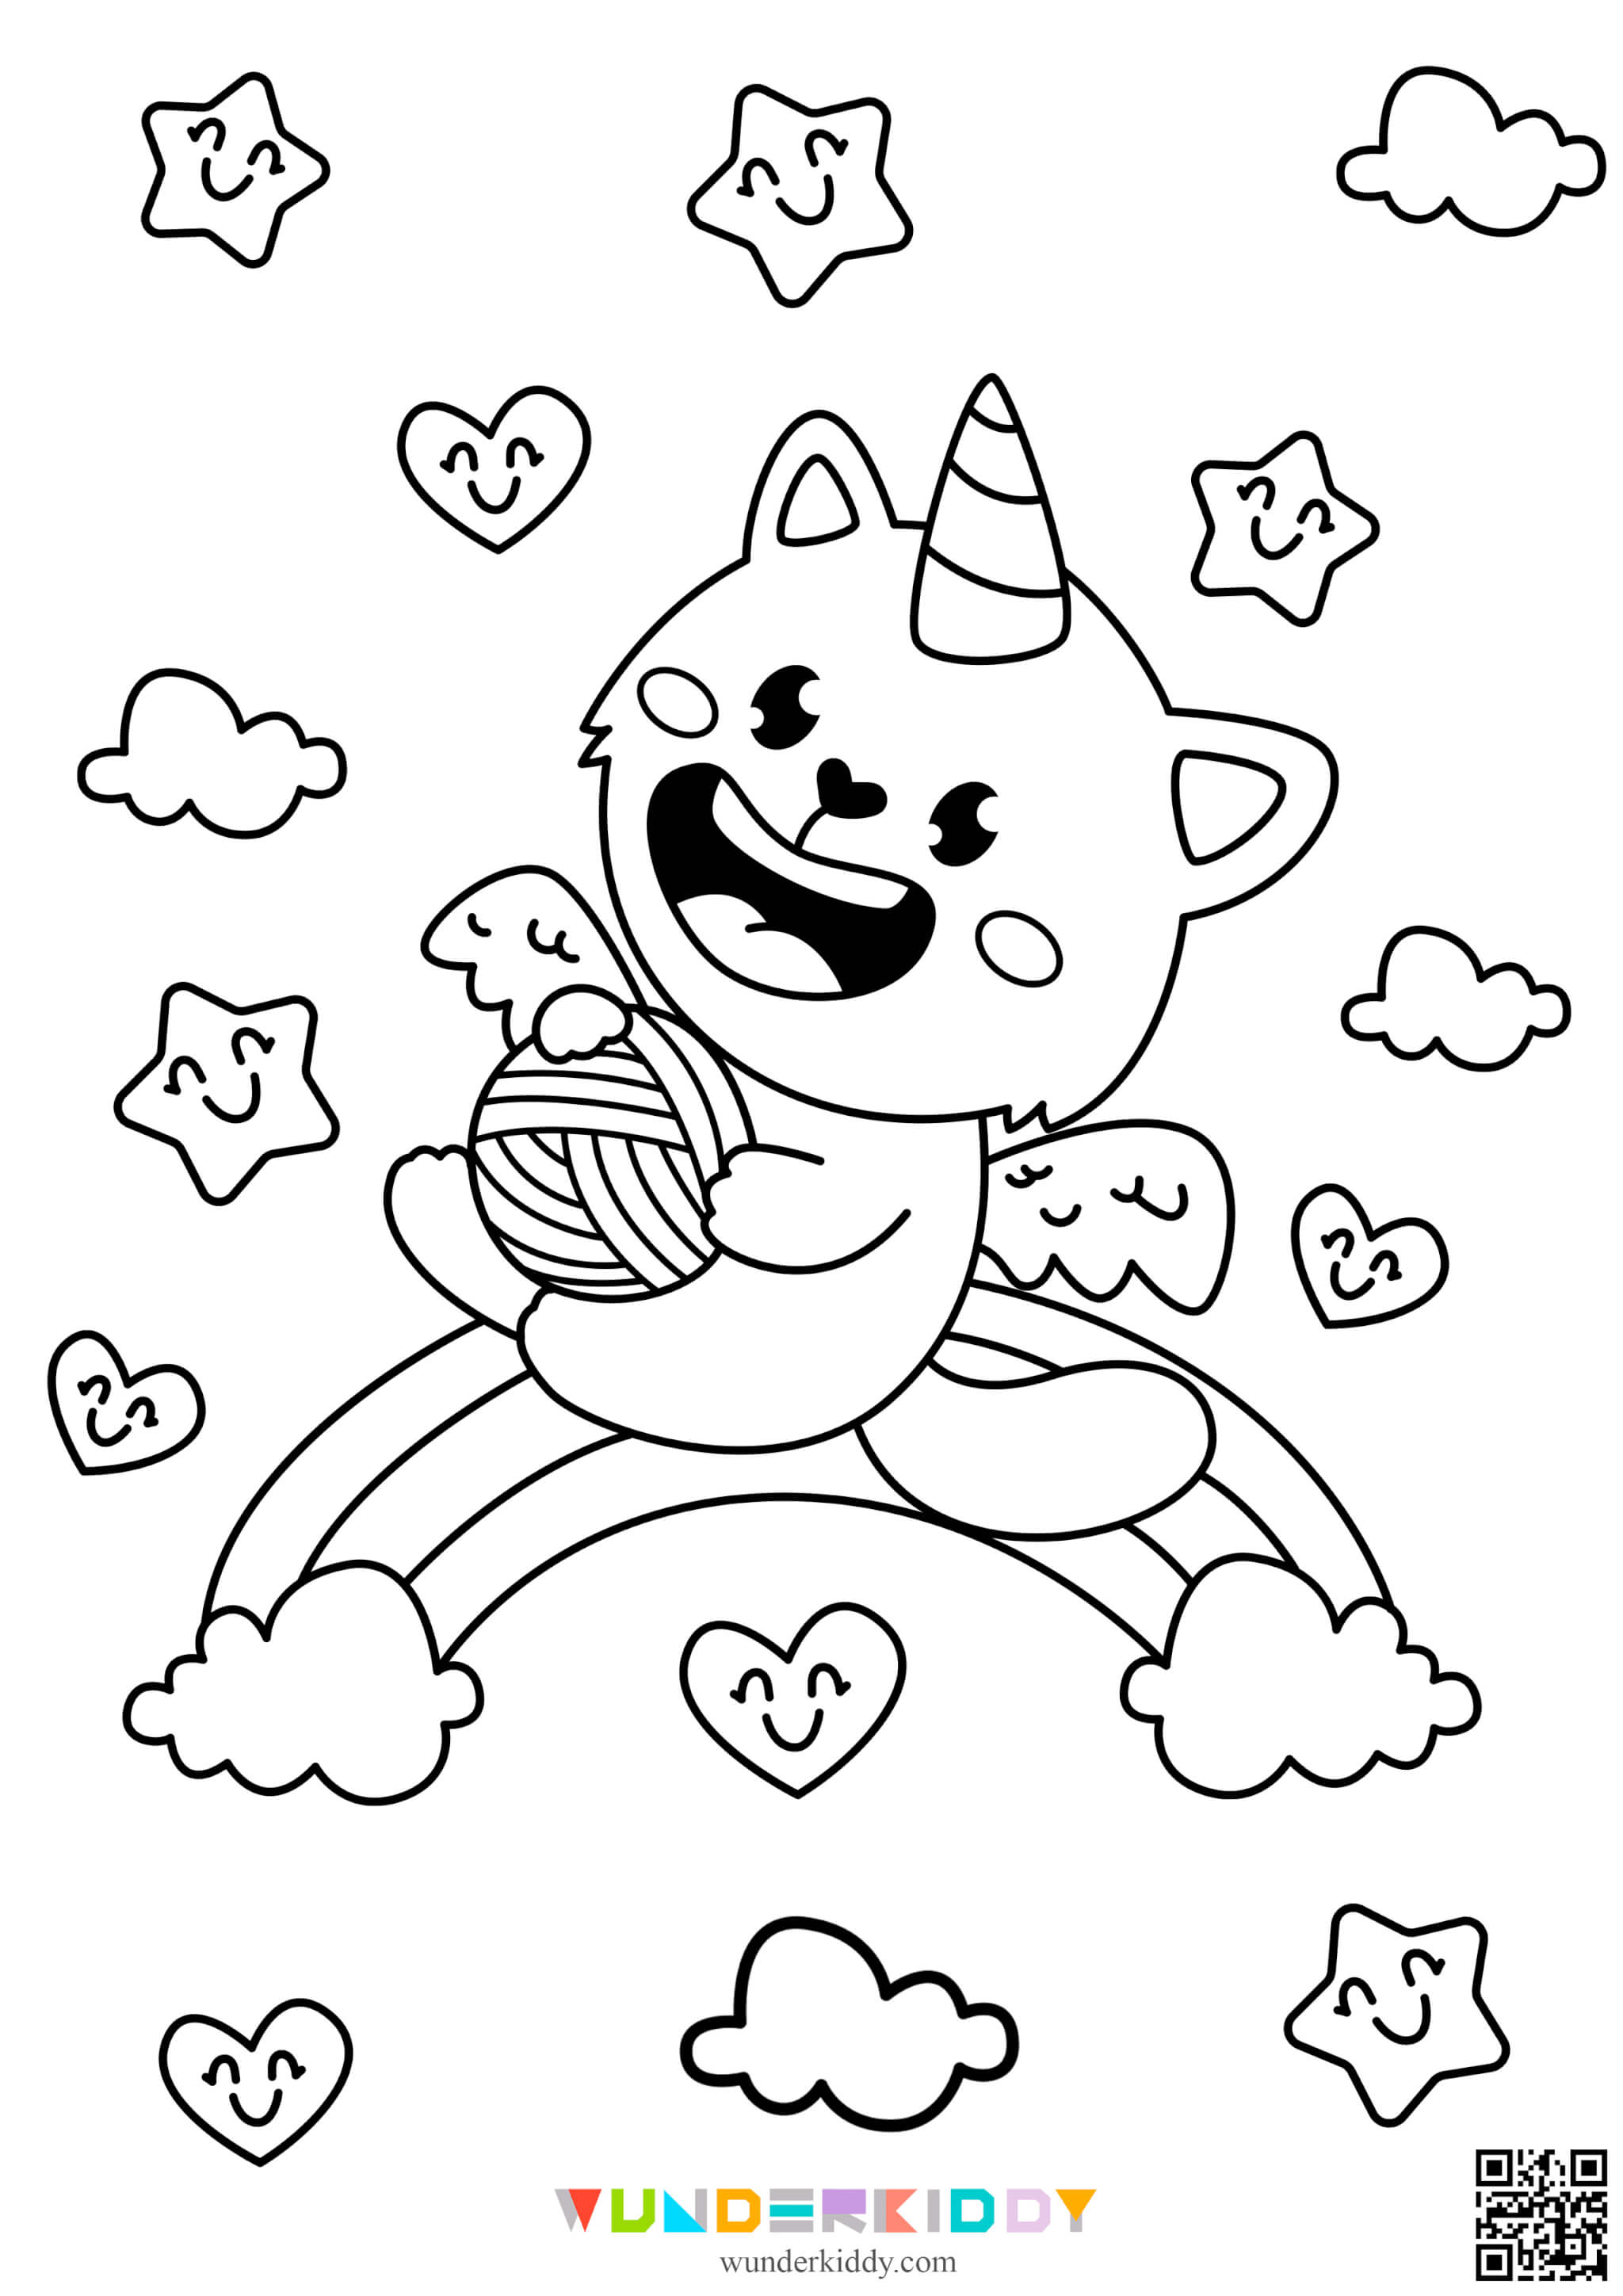 Valentines Coloring Pages - Image 2